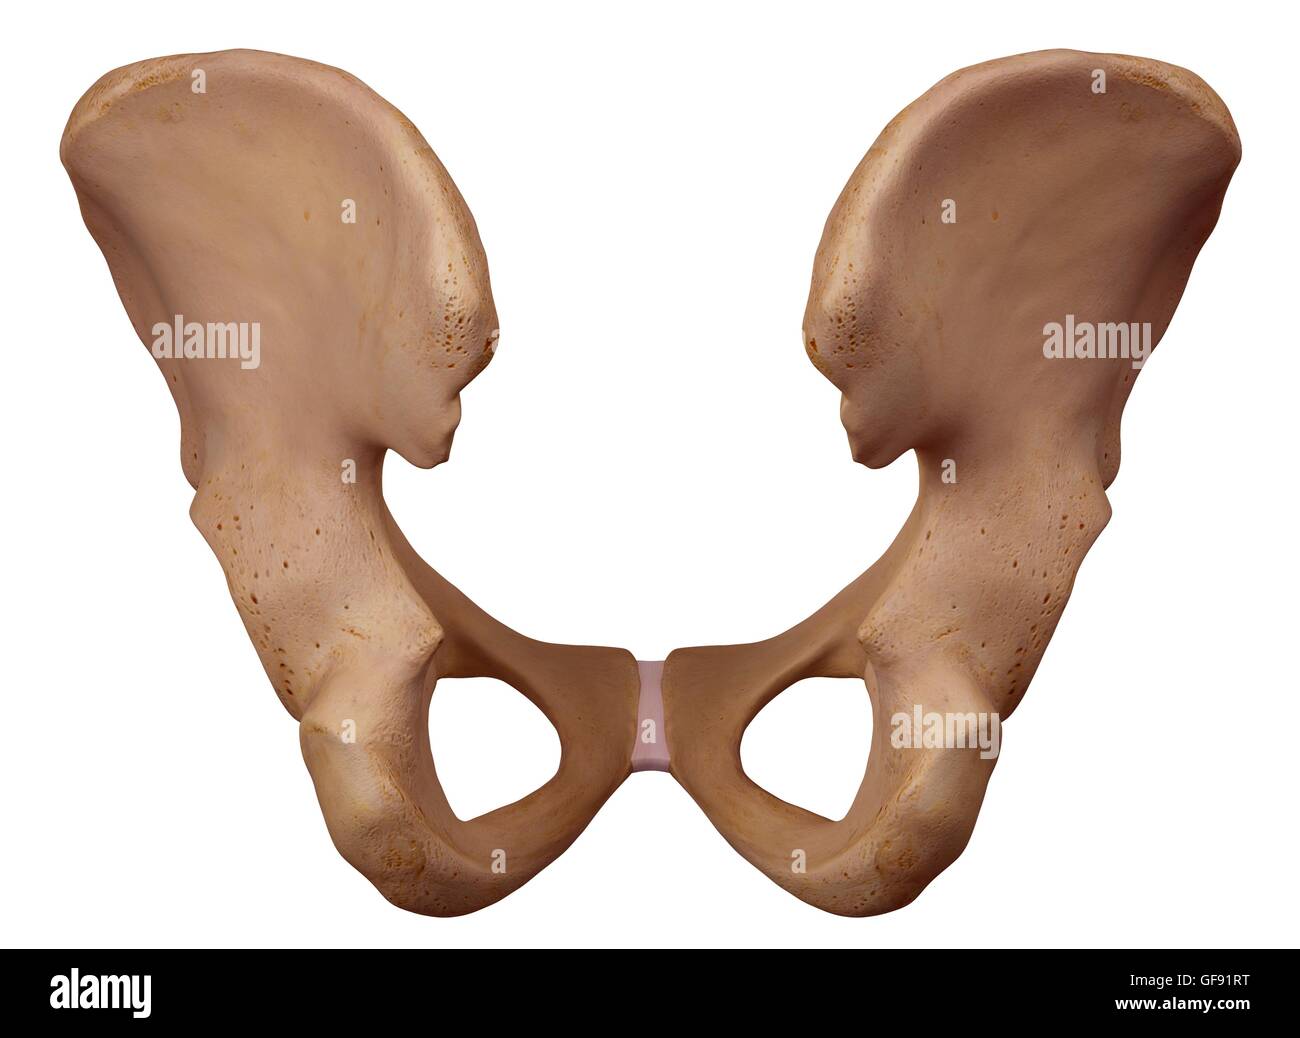 Human Hip Bone High Resolution Stock Photography and Images - Alamy